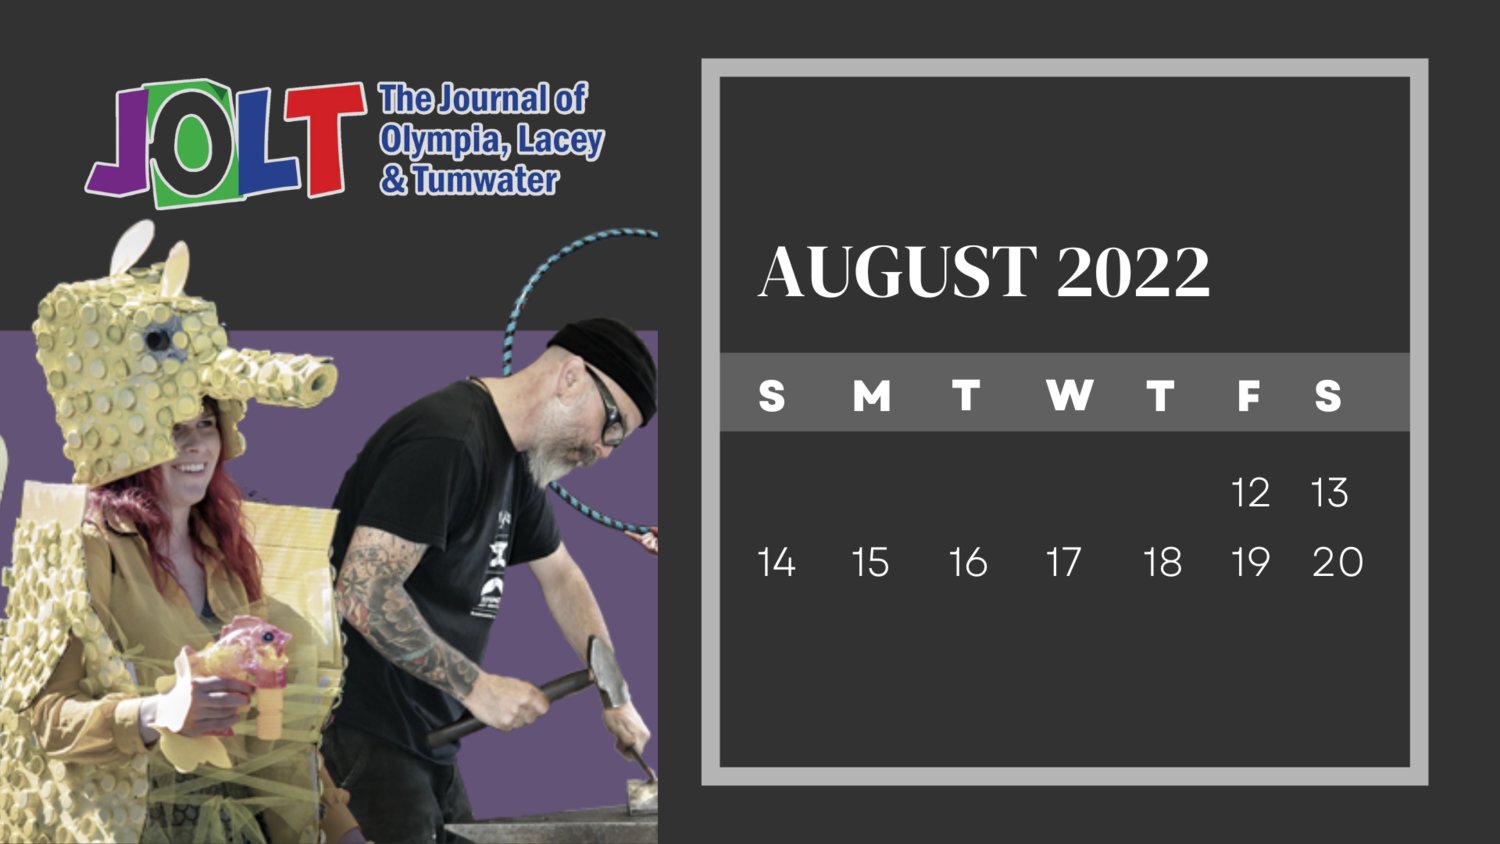 What's happening coming up for the 3rd week of August 2022? The JOLT